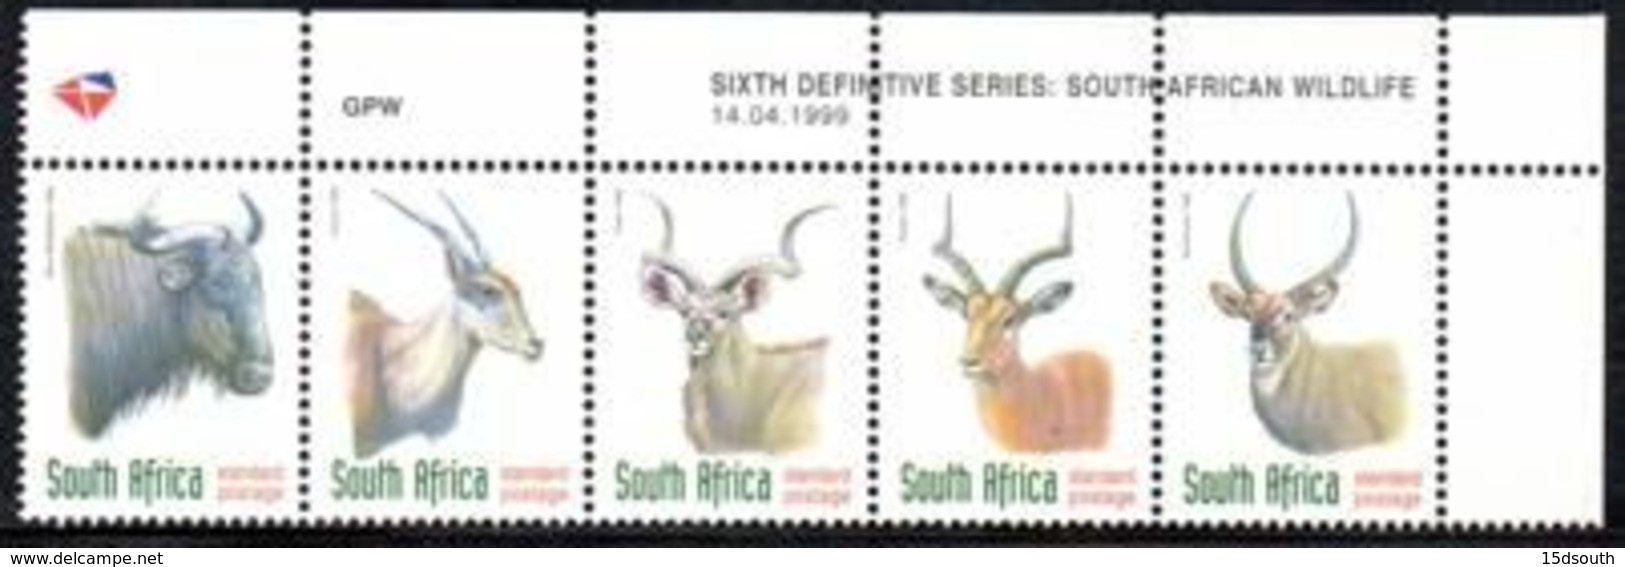 South Africa - 1999 Redrawn 6th Definitive SPR Antelopes Control Block (1999.04.14) (**) - Hojas Bloque